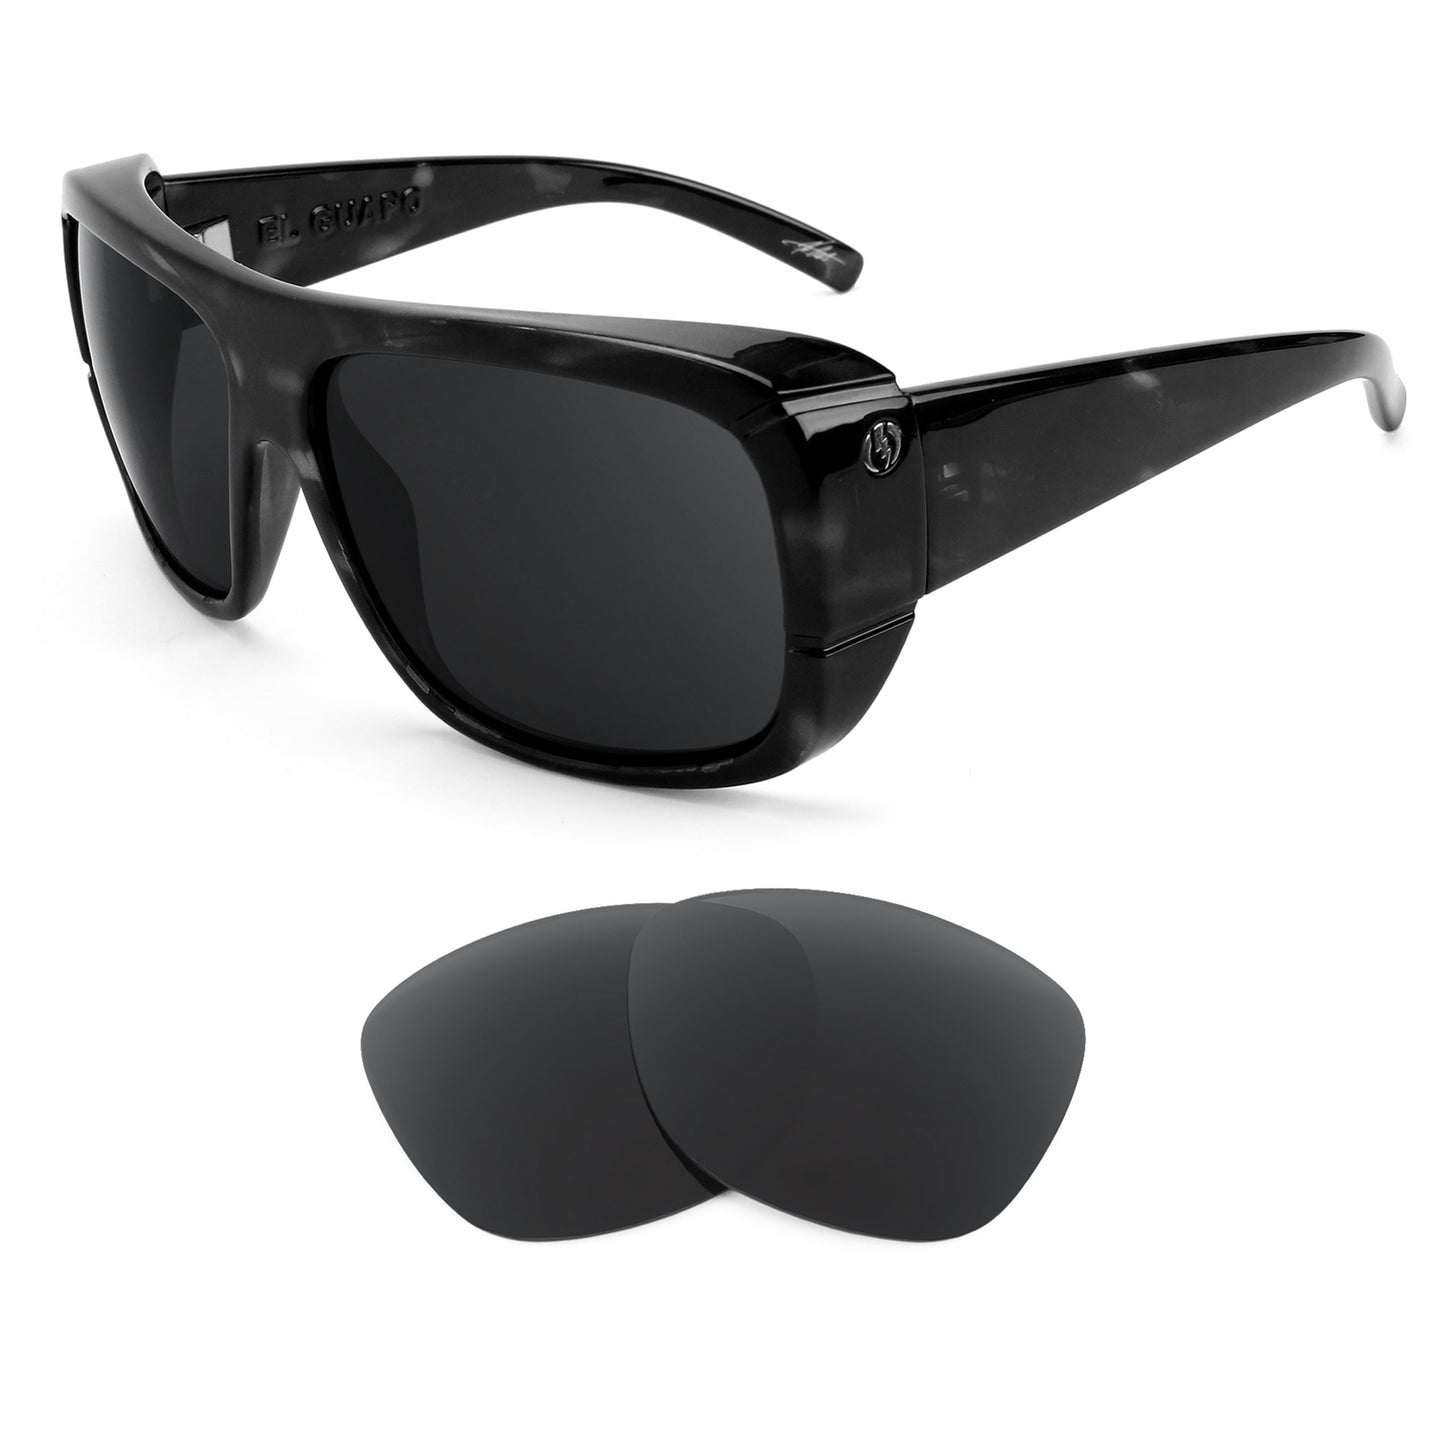 Electric El Guapo sunglasses with replacement lenses